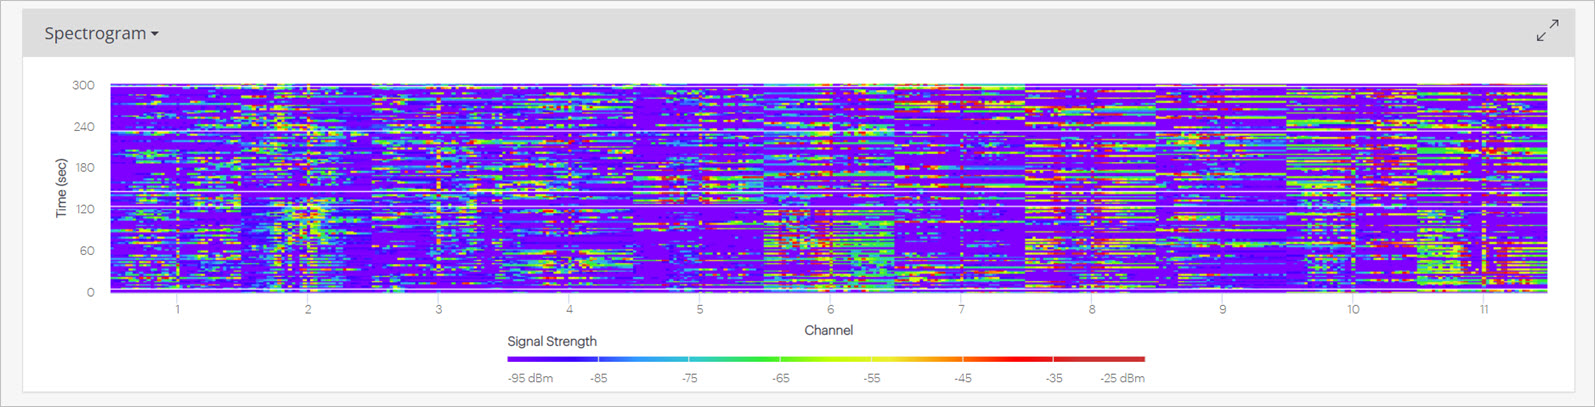 Screen shot of the Spectrum Analysis feature in Discover